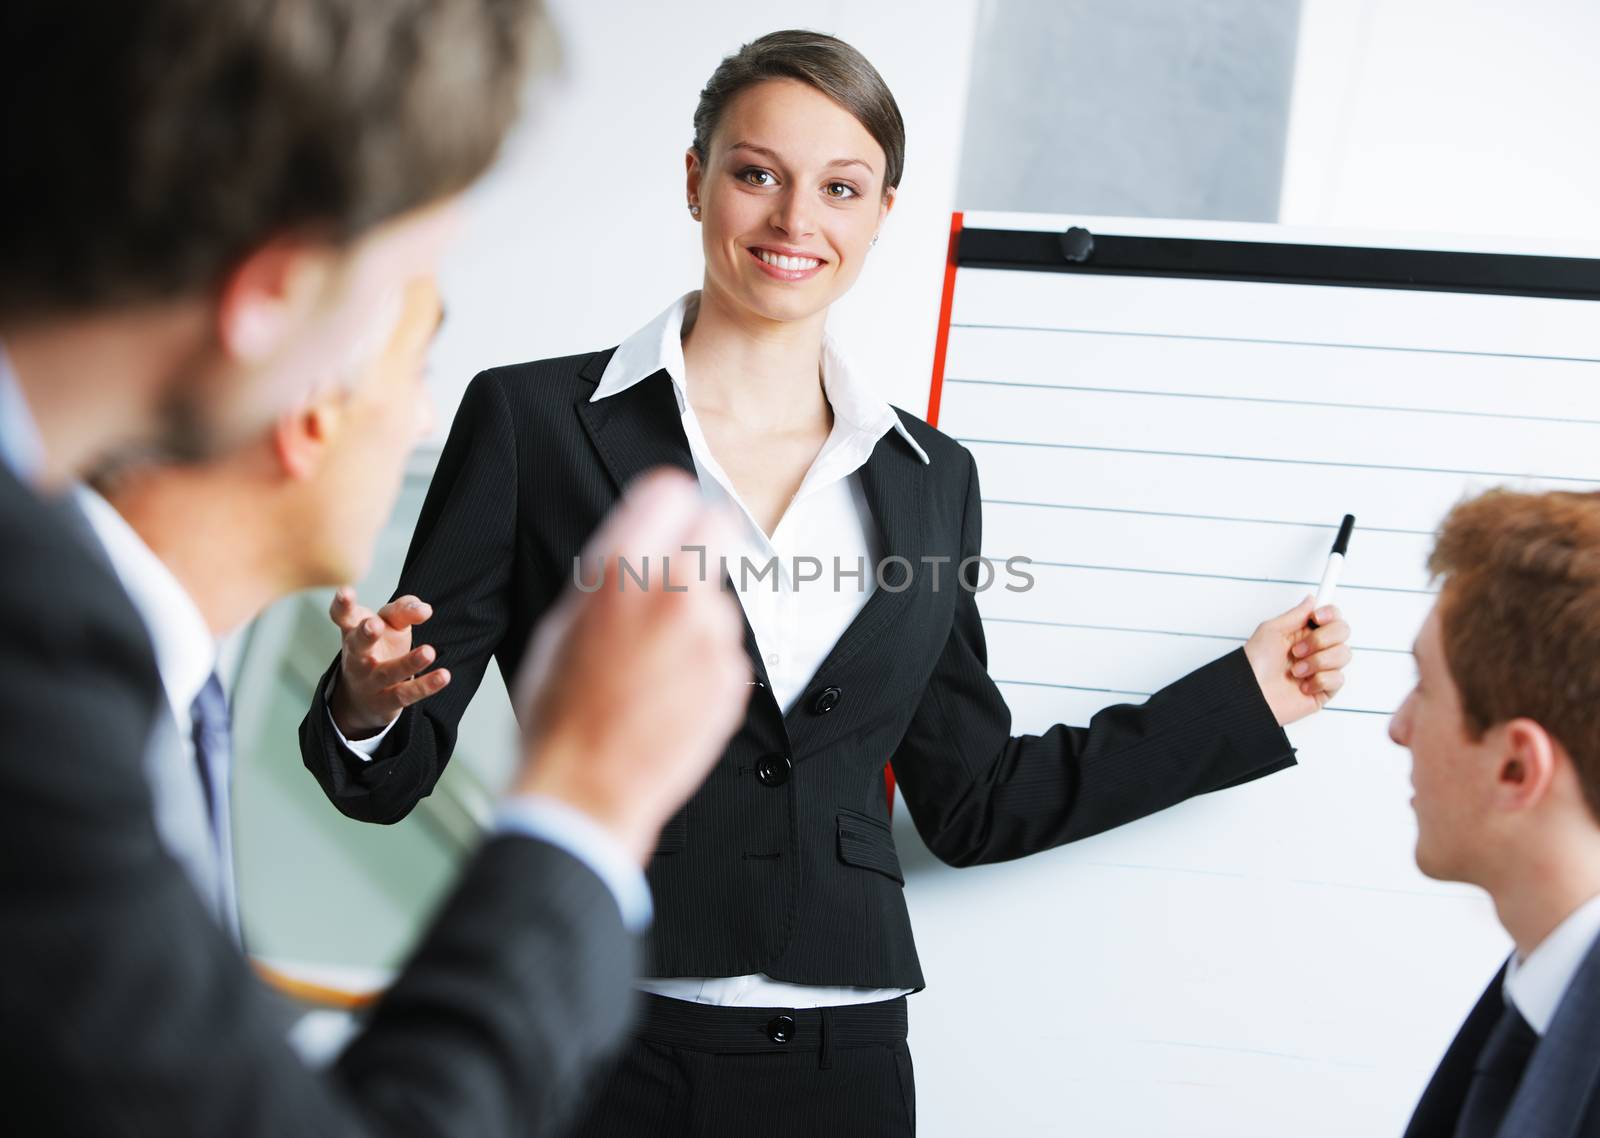 Confident businessowman giving a presentation on whiteboard